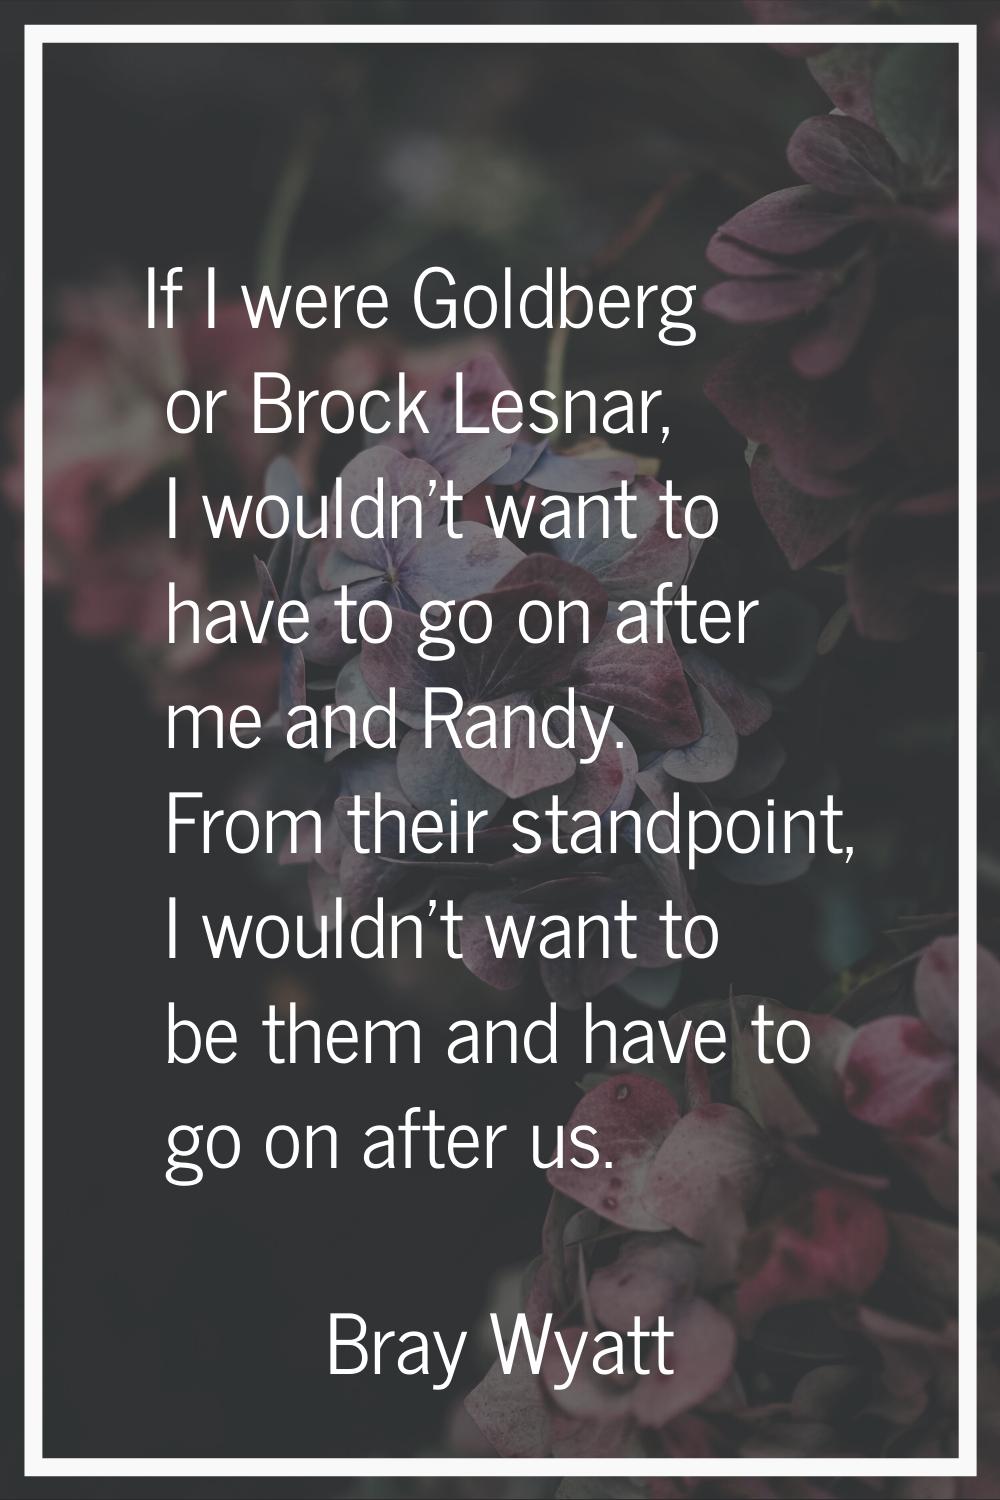 If I were Goldberg or Brock Lesnar, I wouldn't want to have to go on after me and Randy. From their